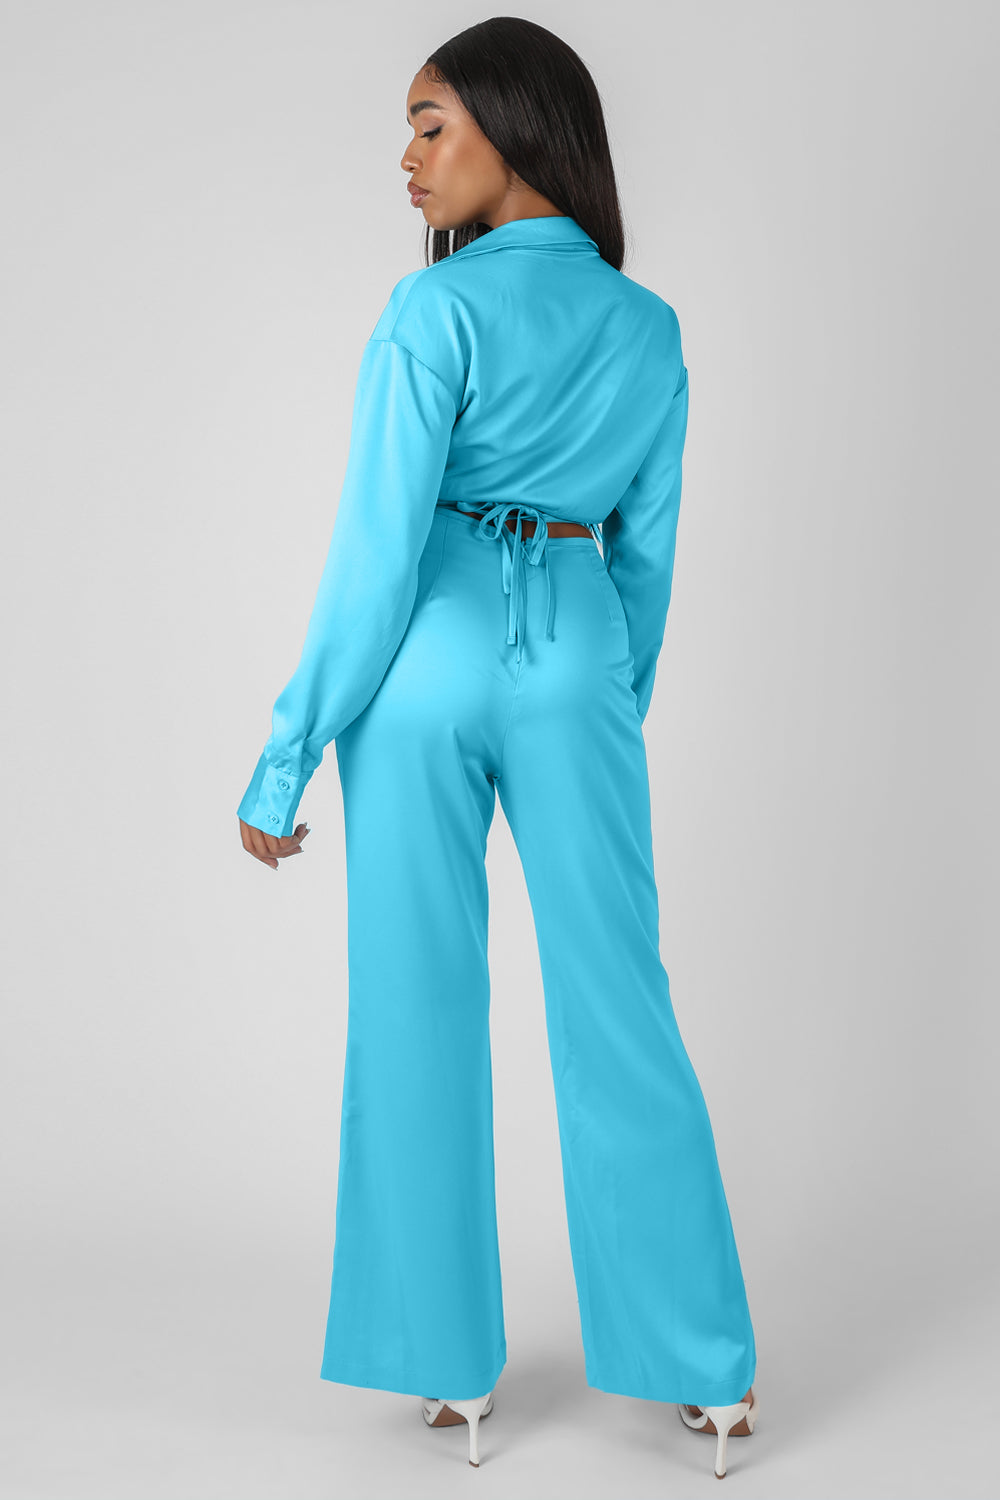 Image of STRAPPY WAIST STRIAGHT LEG TROUSER BLUE